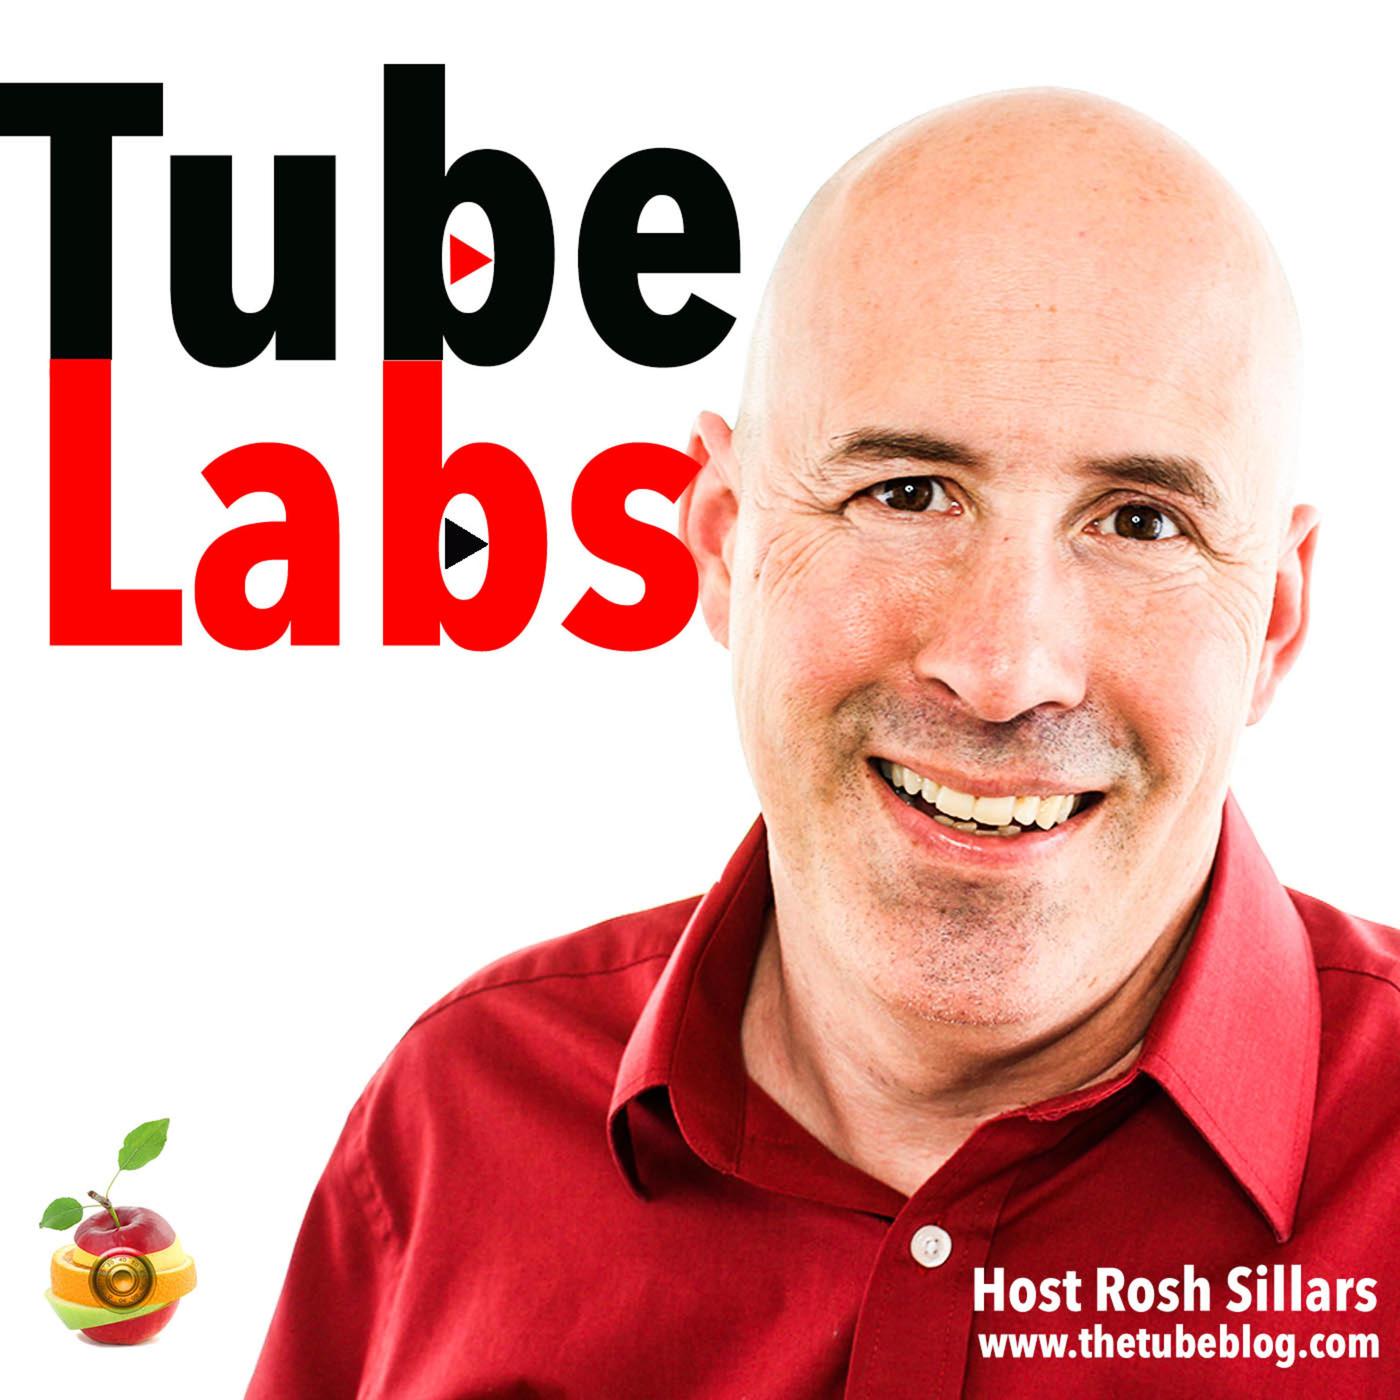 Tube Labs Podcast - A Podcast For YouTube Creators About Growing A YouTube Channel